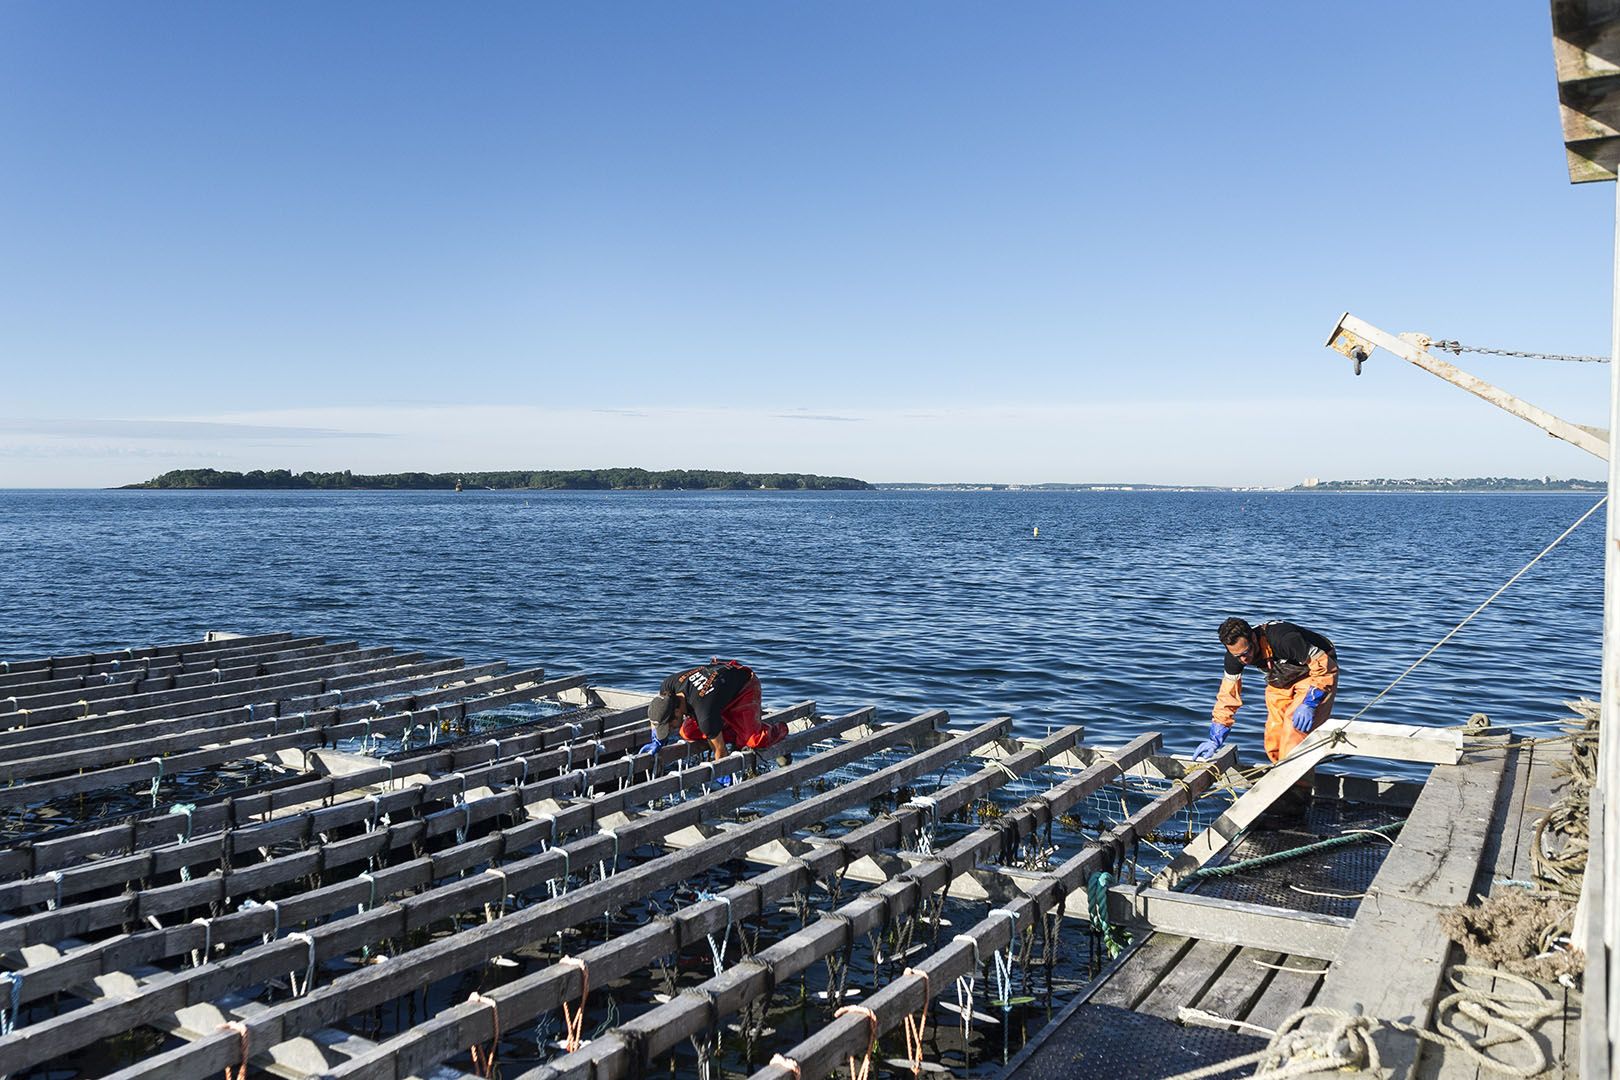 Bangs Island mussels grow on ropes that hang from rafts, and each rope is about 35 feet long.